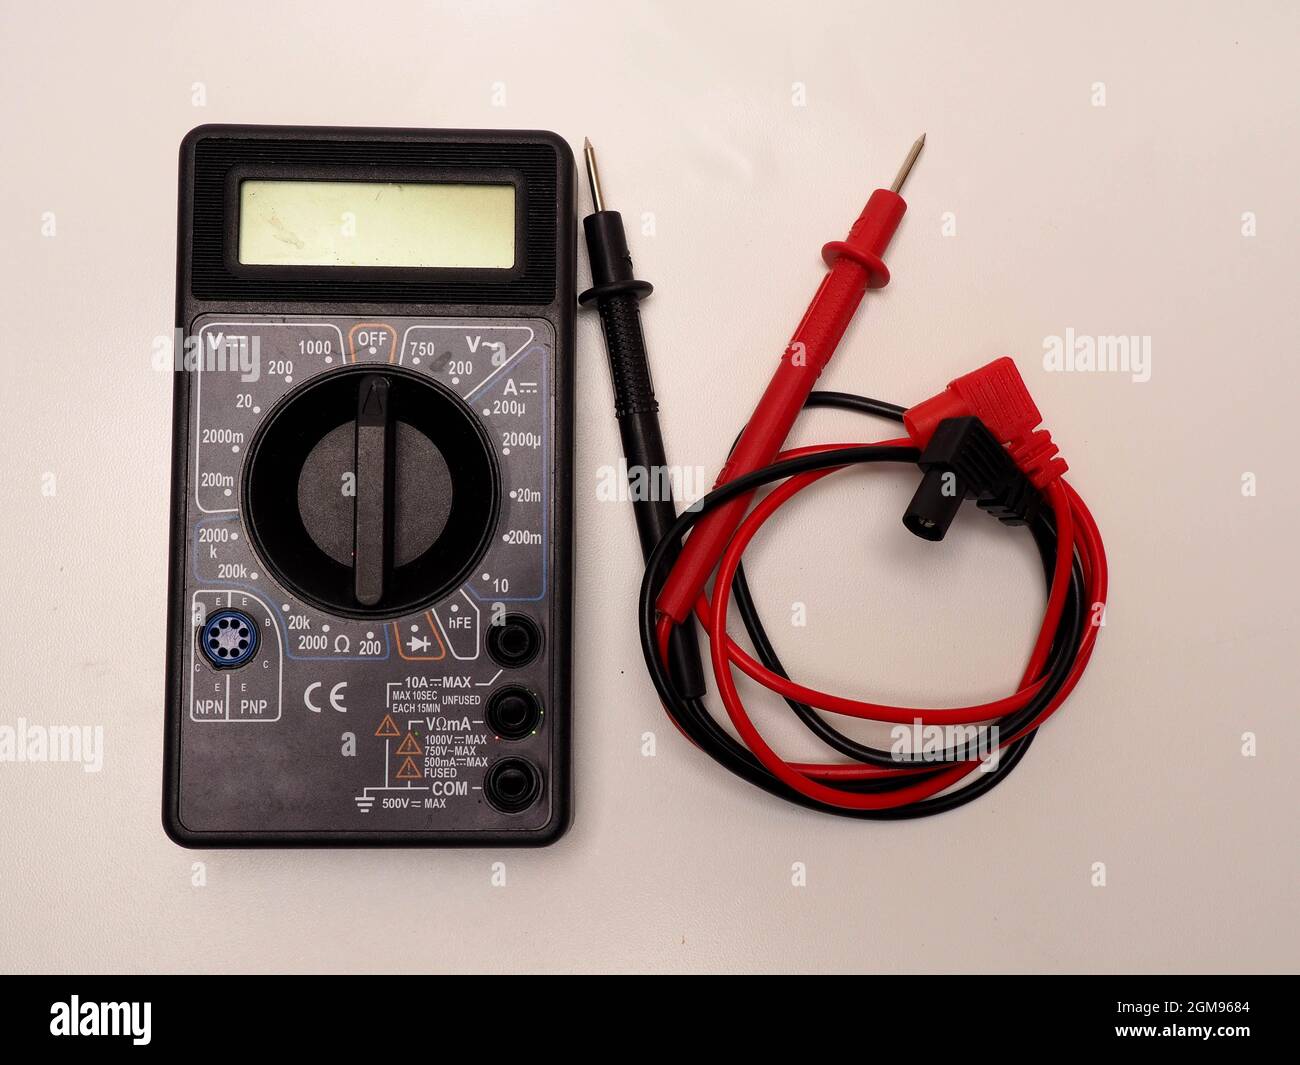 https://c8.alamy.com/comp/2GM9684/picture-of-black-digital-multimeter-or-avo-meter-for-measuring-electrical-stuff-such-as-voltage-resistance-and-current-shoot-on-a-white-isolated-ba-2GM9684.jpg